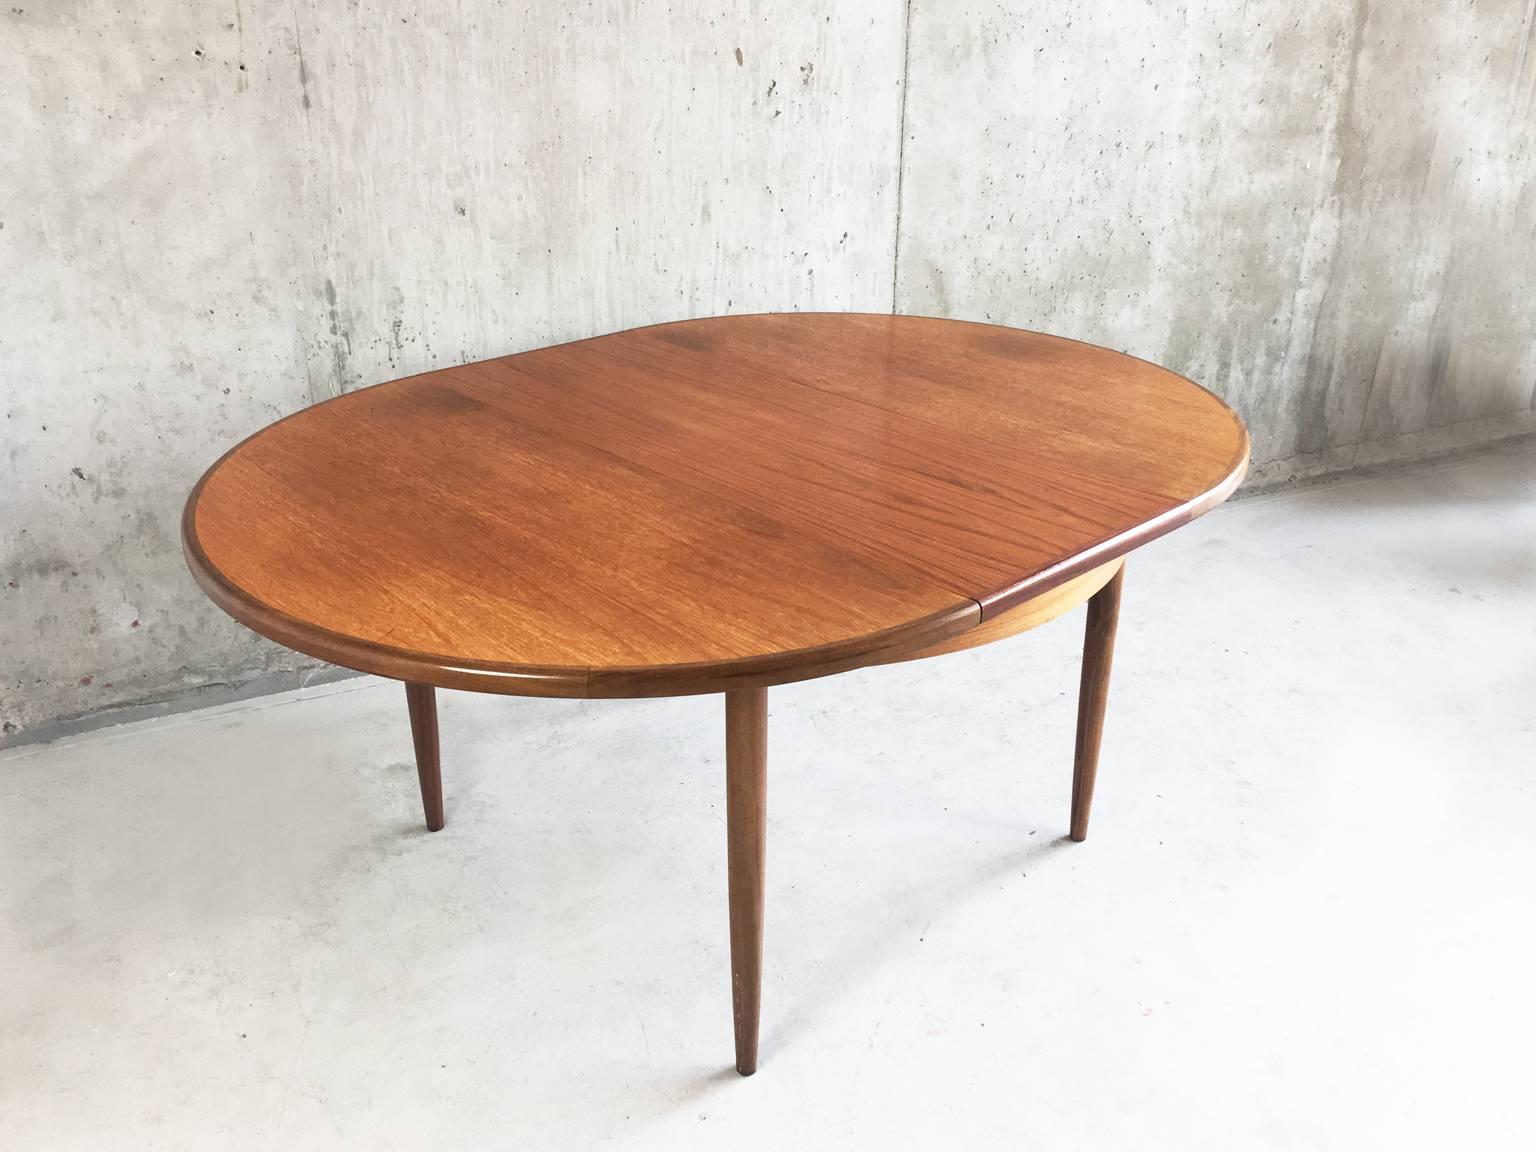 A solid teak original extendable G Plan table with lovely wood grain. The table is very well made and substantial with a fold down central section. Original G Plan sticker on underside of flap.

Measure: Table width extended 168cm, width